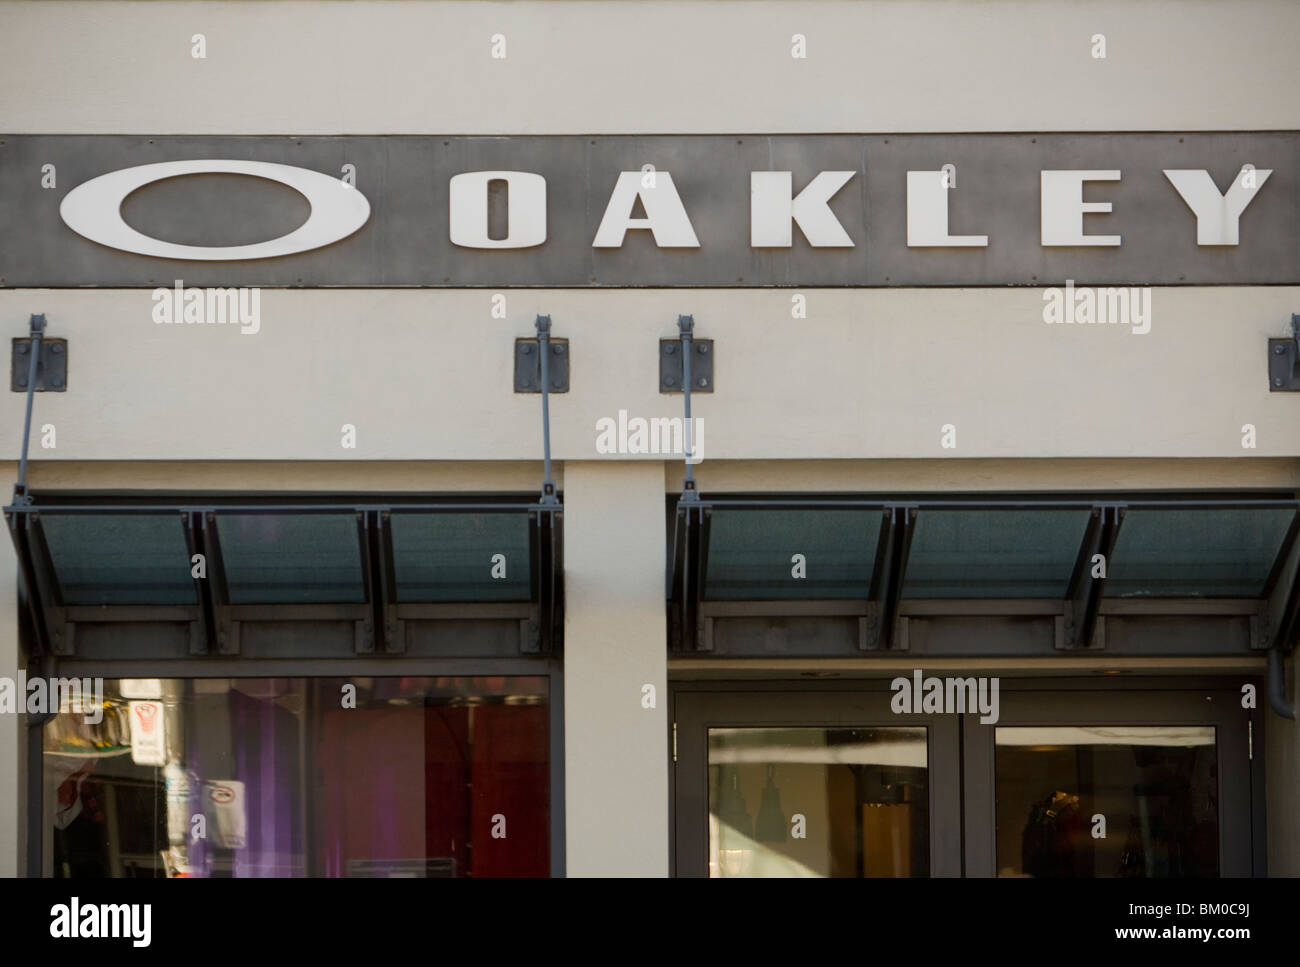 closest oakley store to me